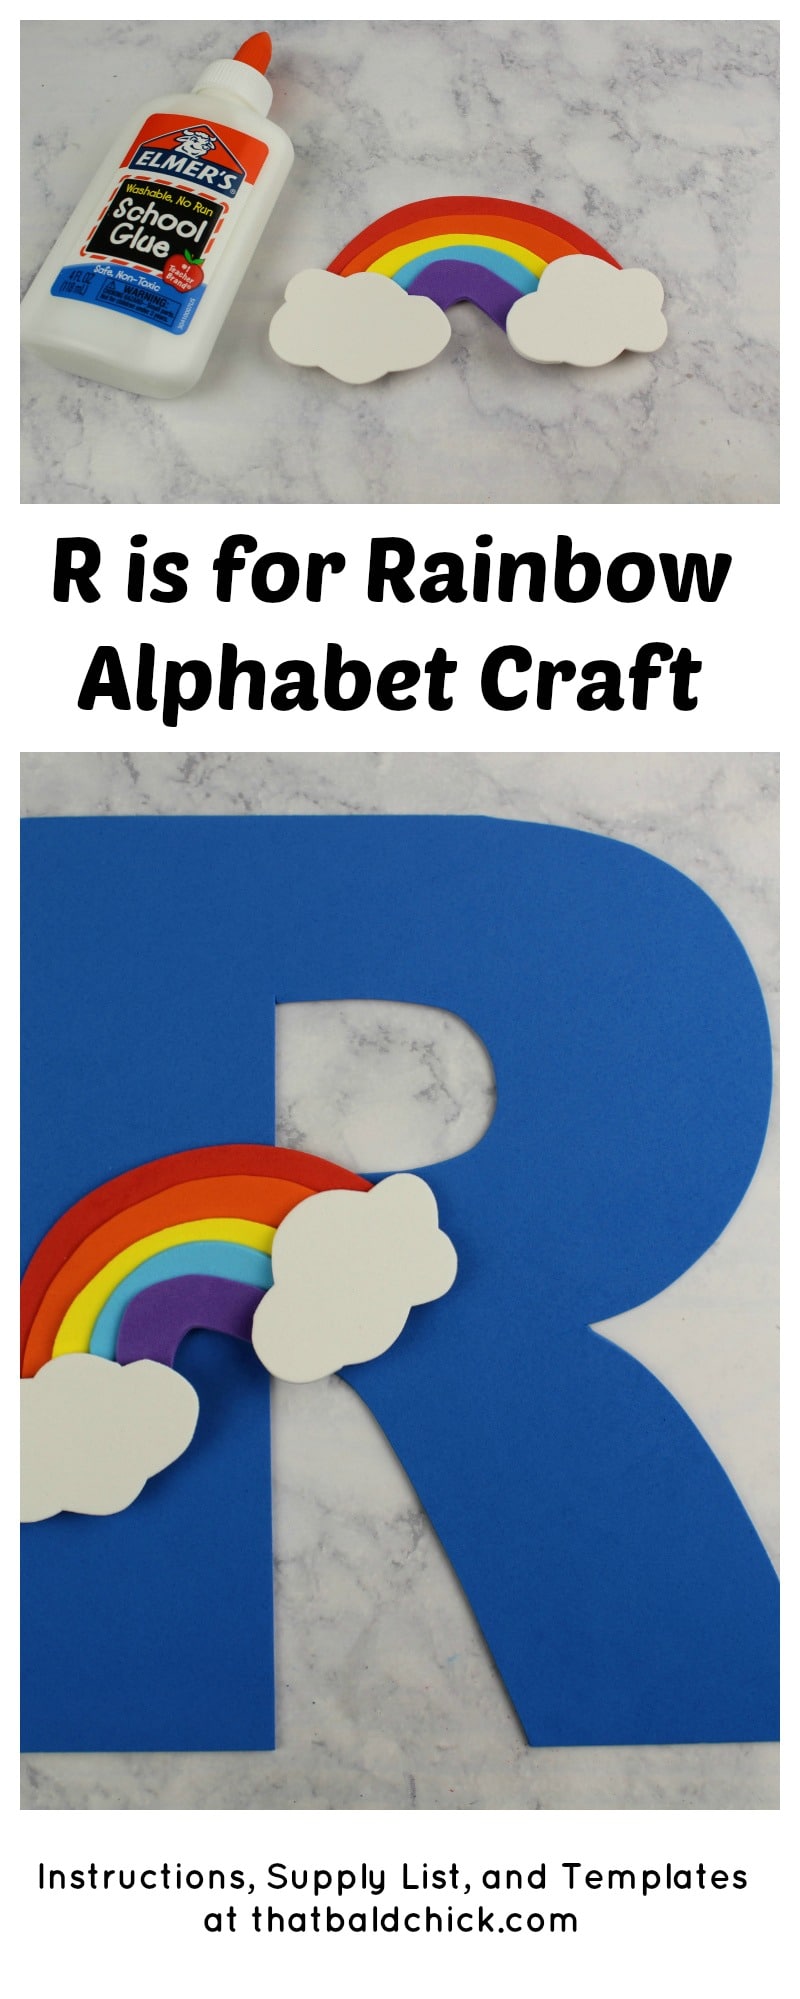 R is for Rainbow Alphabet Craft - #free #printable templates and instructions at thatbaldchick.com